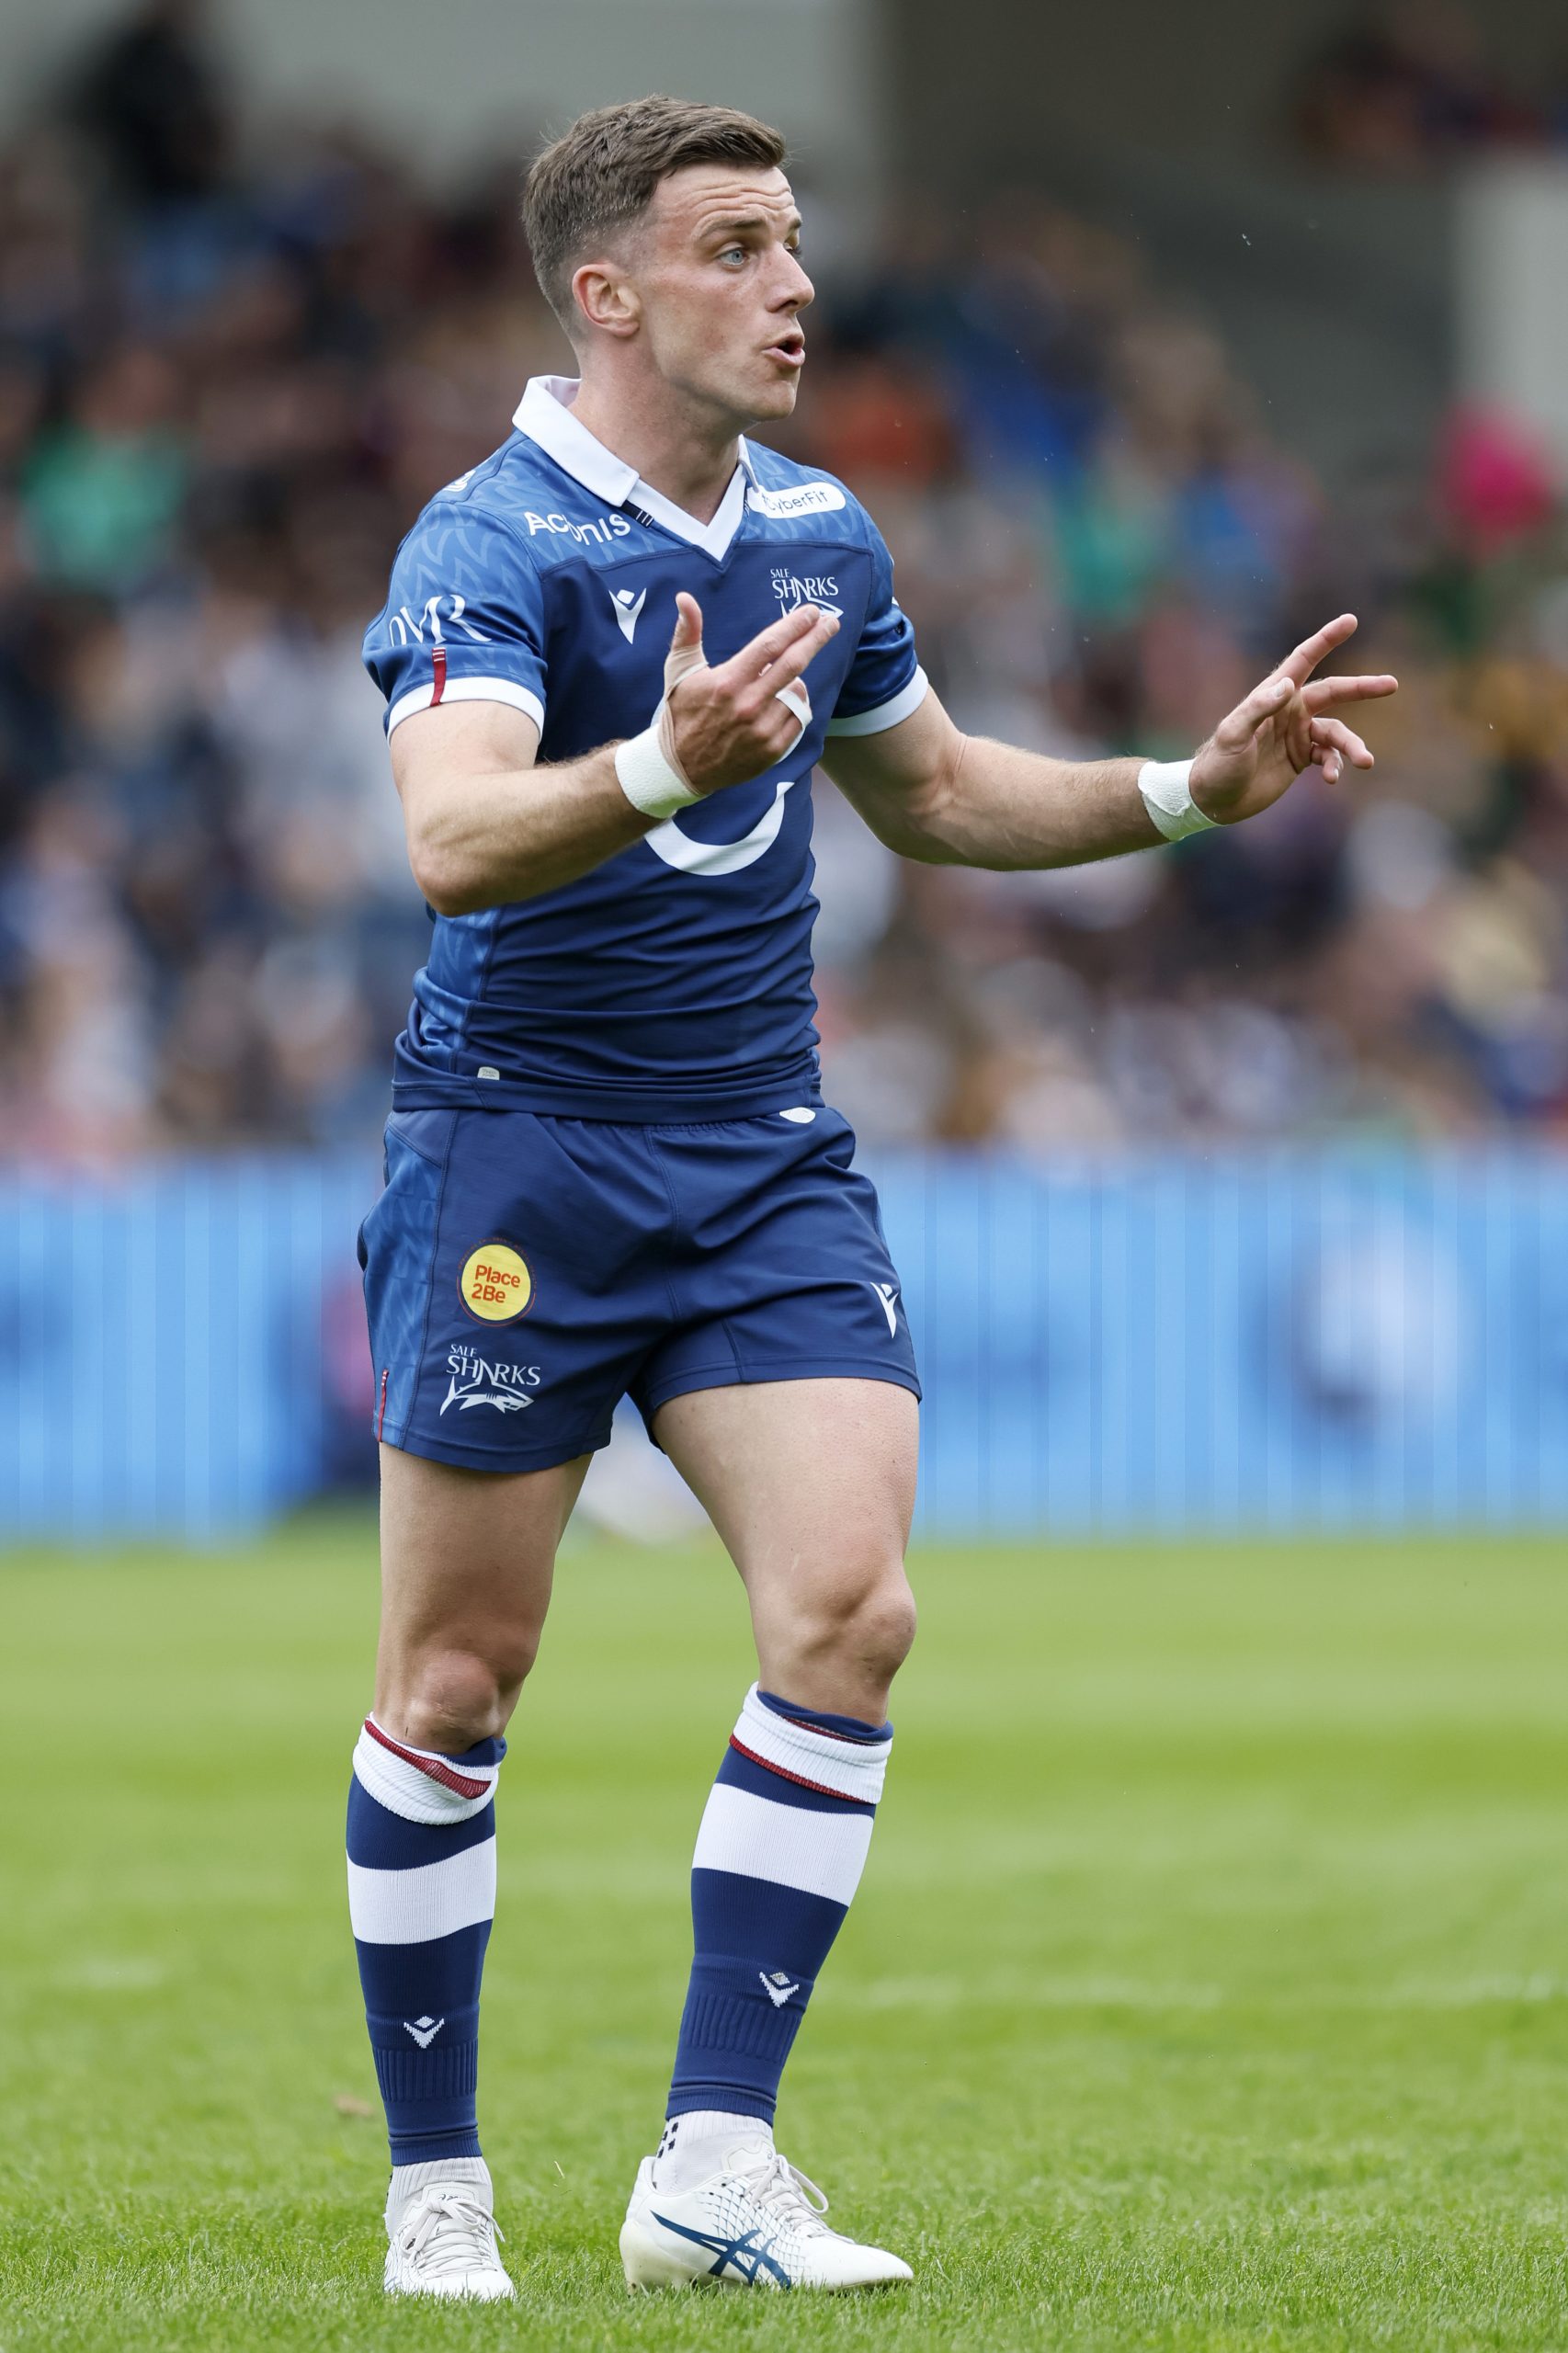 George Ford ‘a little pocket of calm amid the chaos’, says Alex Sanderson